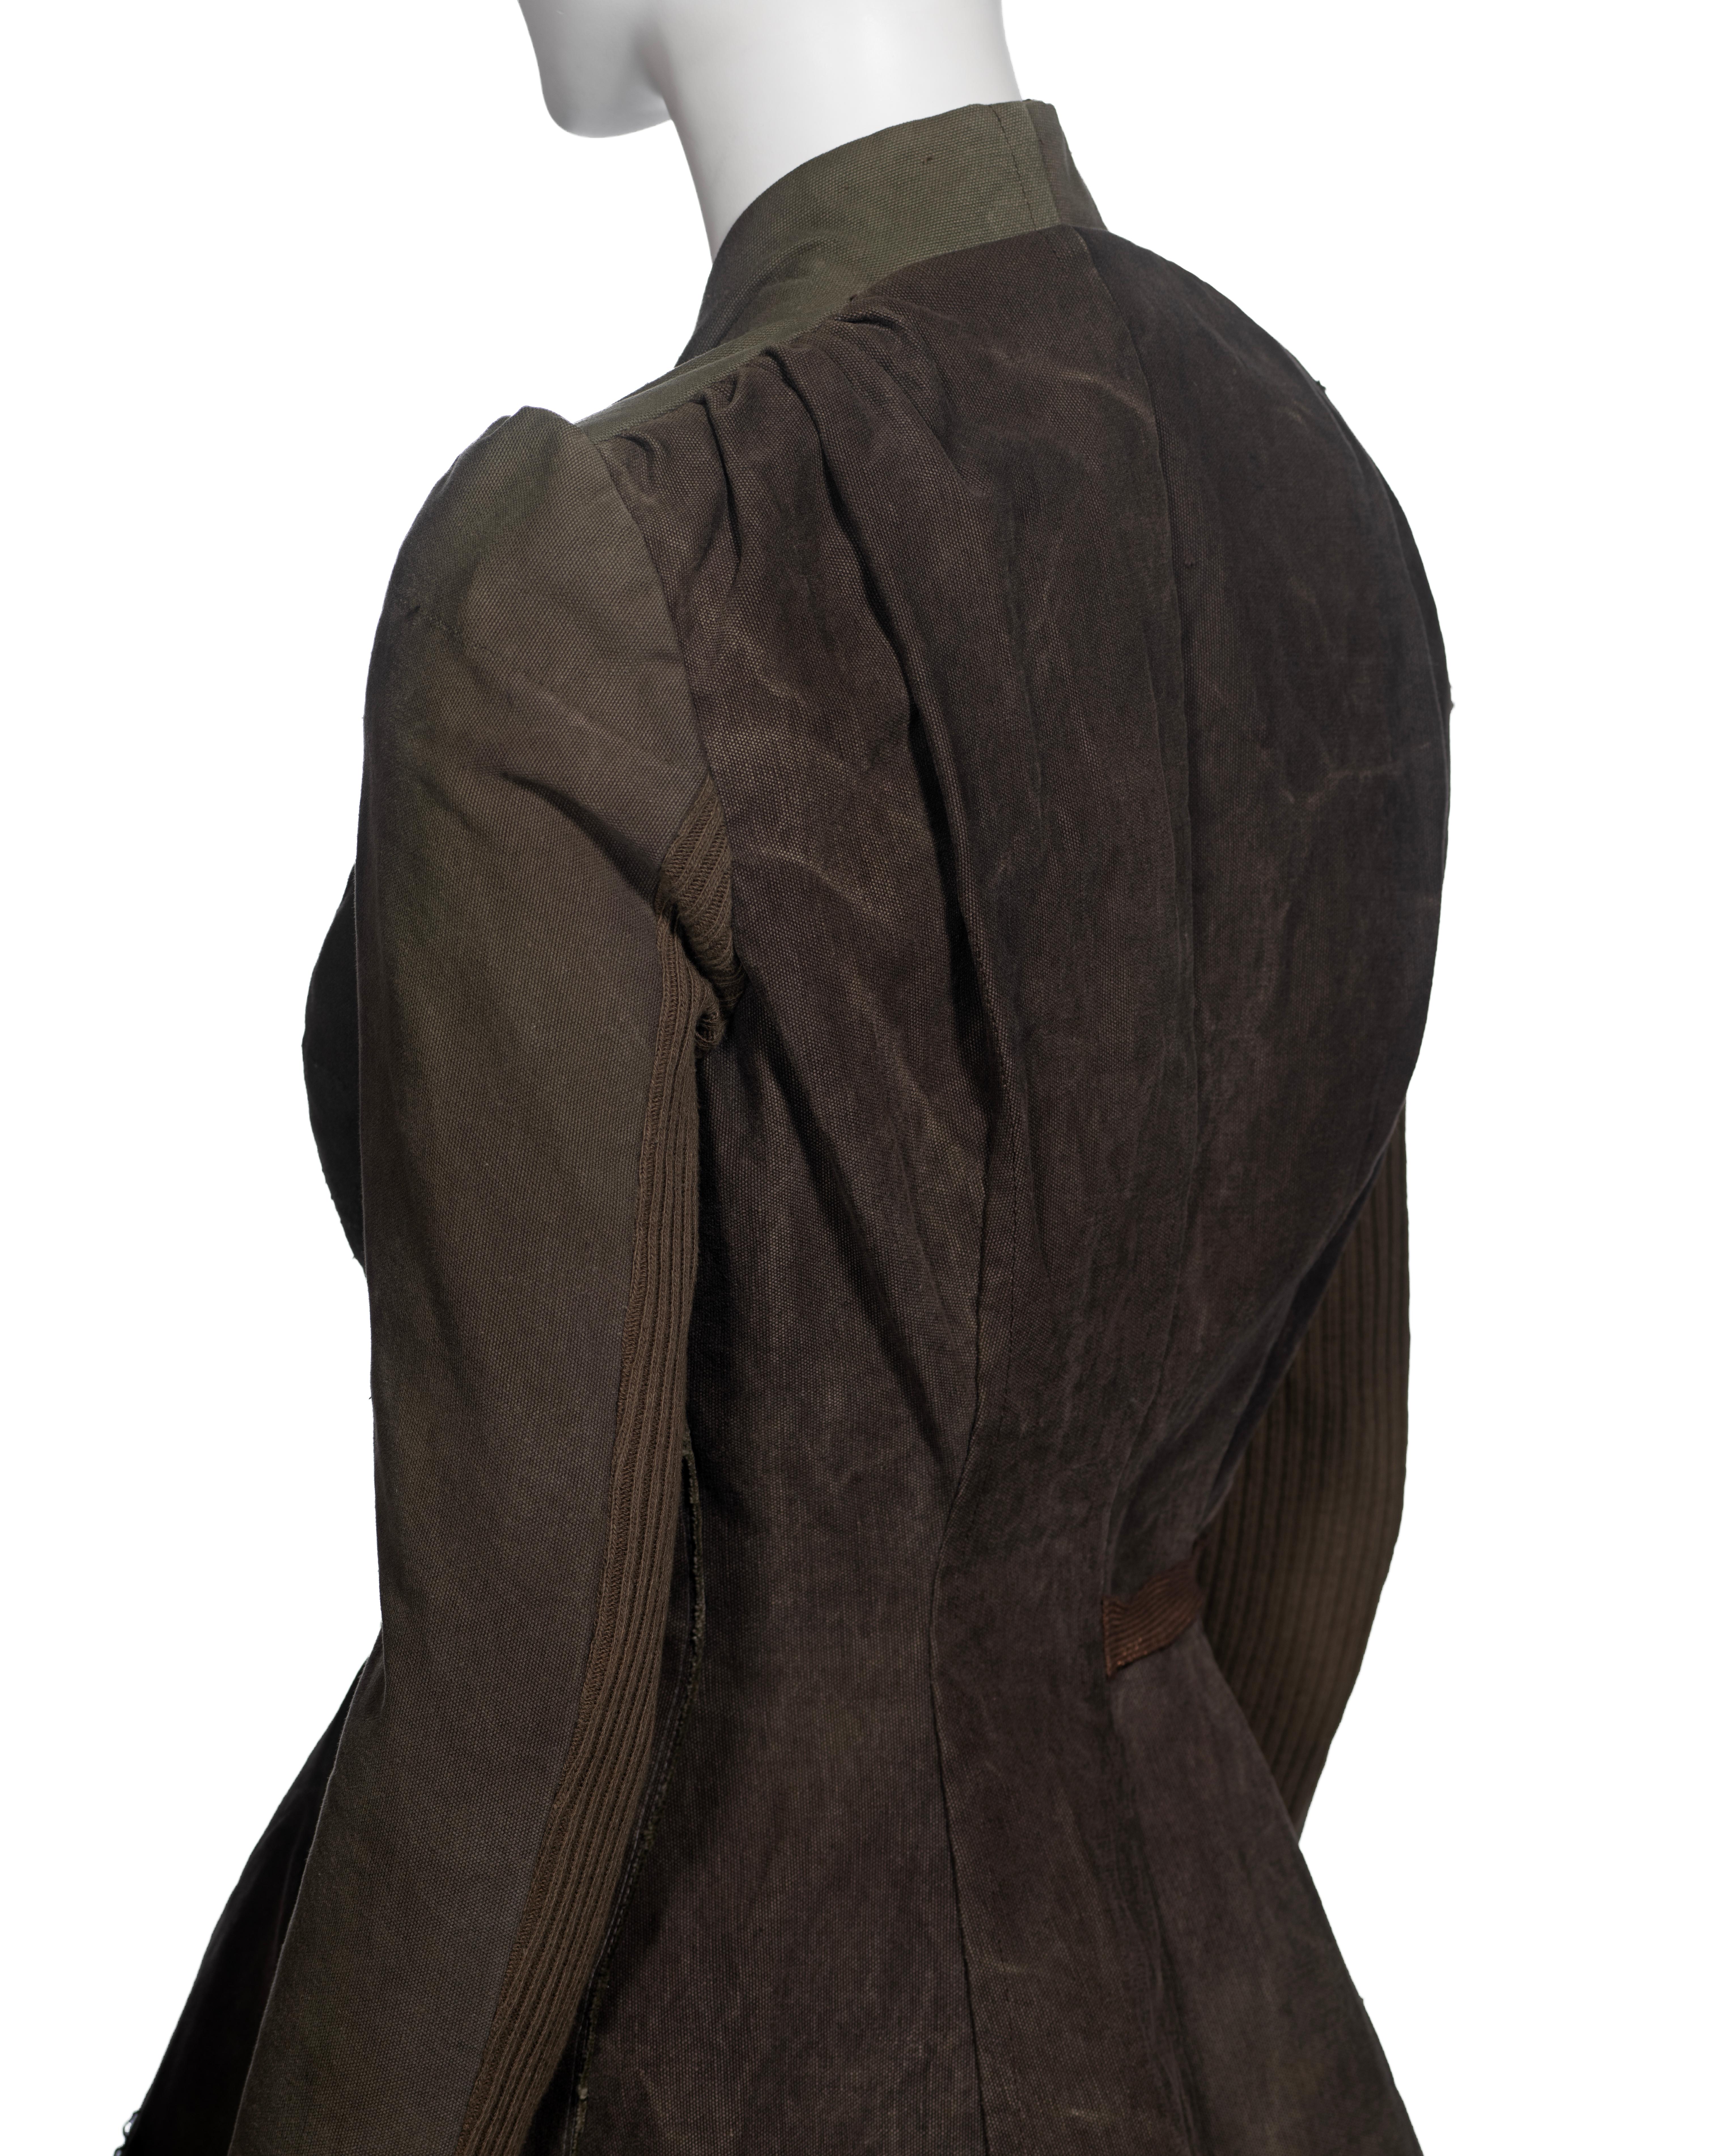 Rick Owens Jacket Made From Deconstructed Military Surplus Bags, c. 1998 11